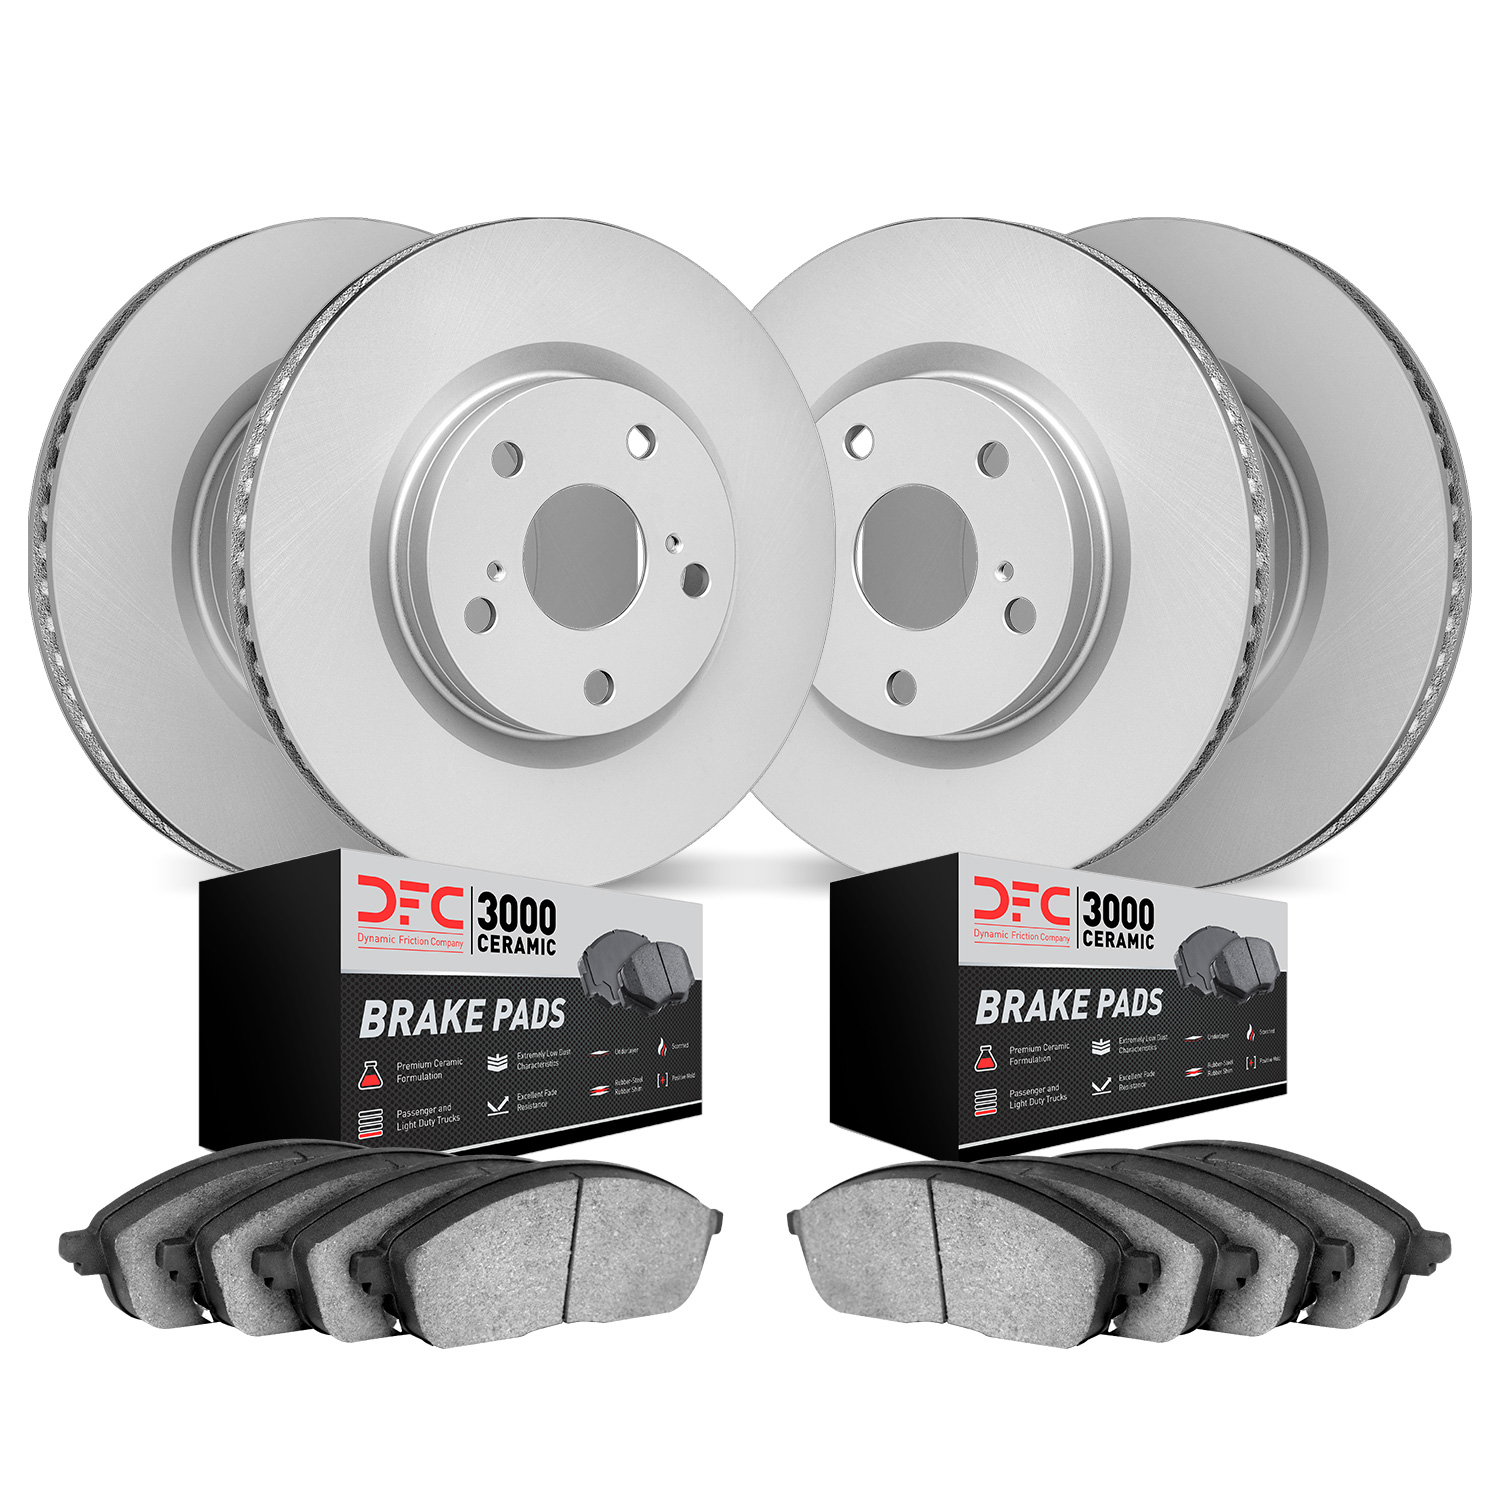 4304-31031 Geospec Brake Rotors with 3000-Series Ceramic Brake Pads Kit, 2006-2010 BMW, Position: Front and Rear